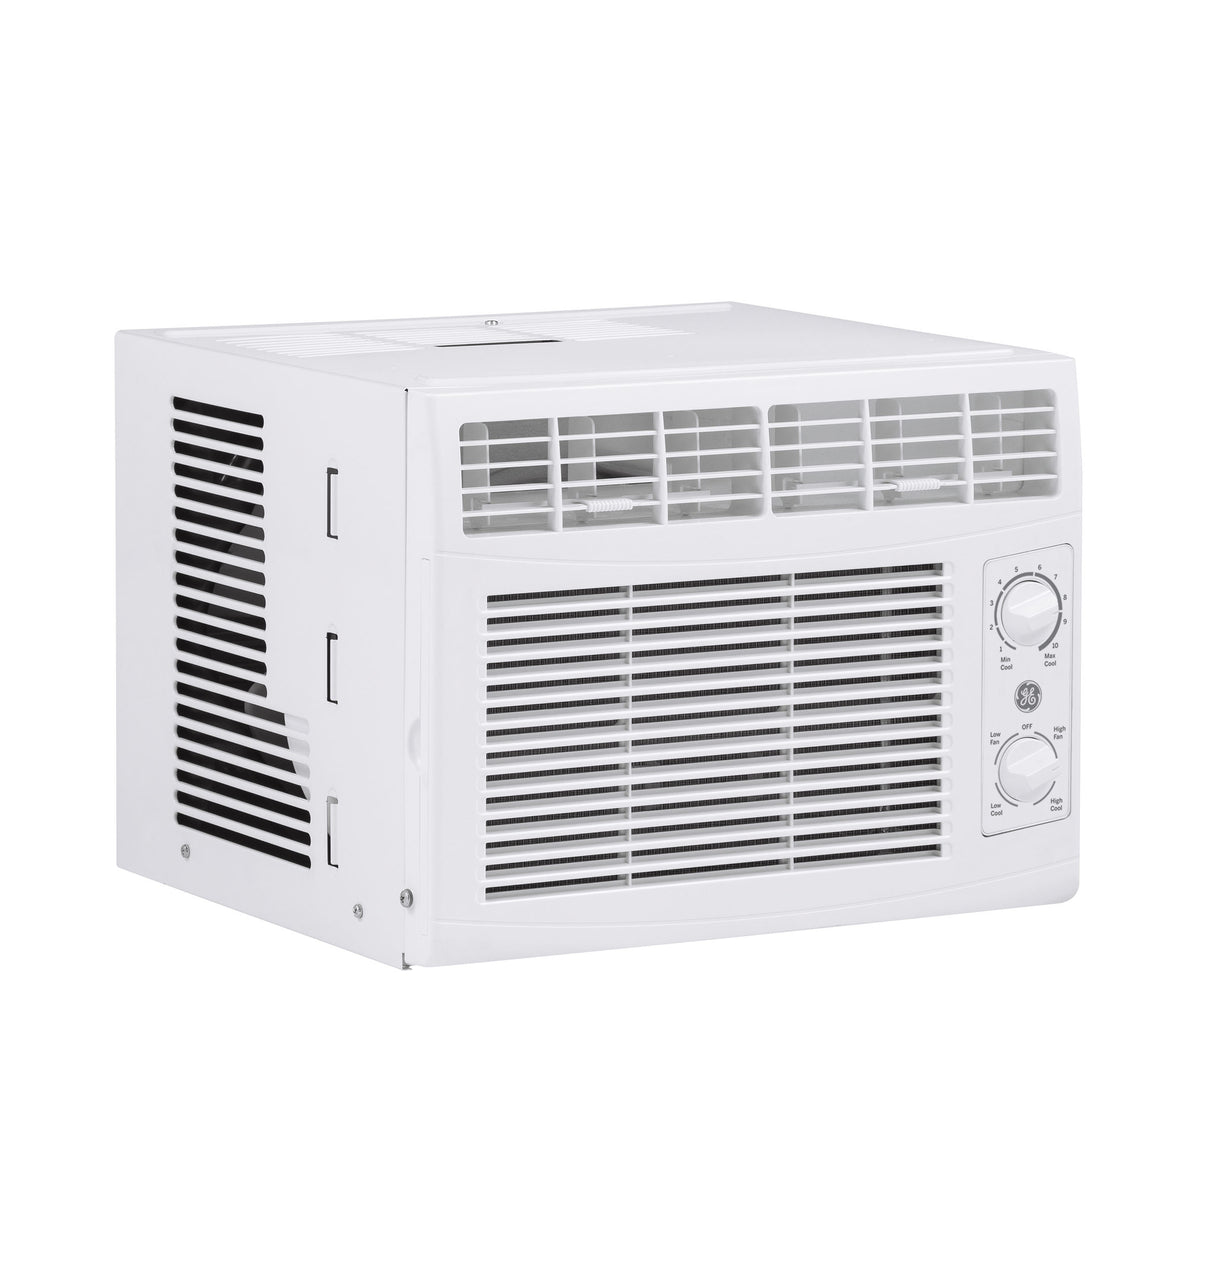 GE(R) 5,000 BTU Mechanical Window Air Conditioner for Small Rooms up to 150 sq ft. - (AHV05LZ)